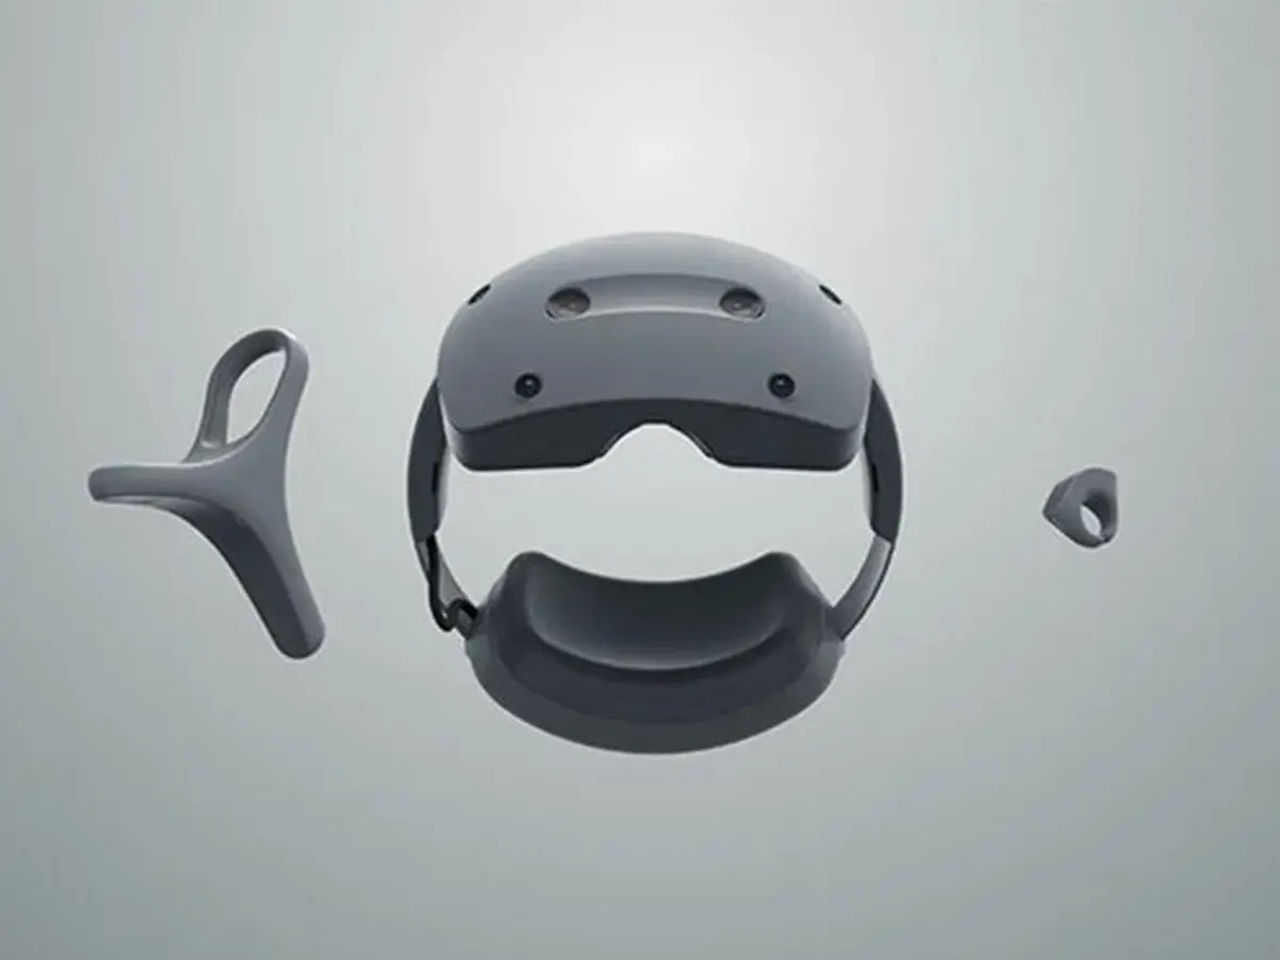 Sony Mixed Reality Headset Preview